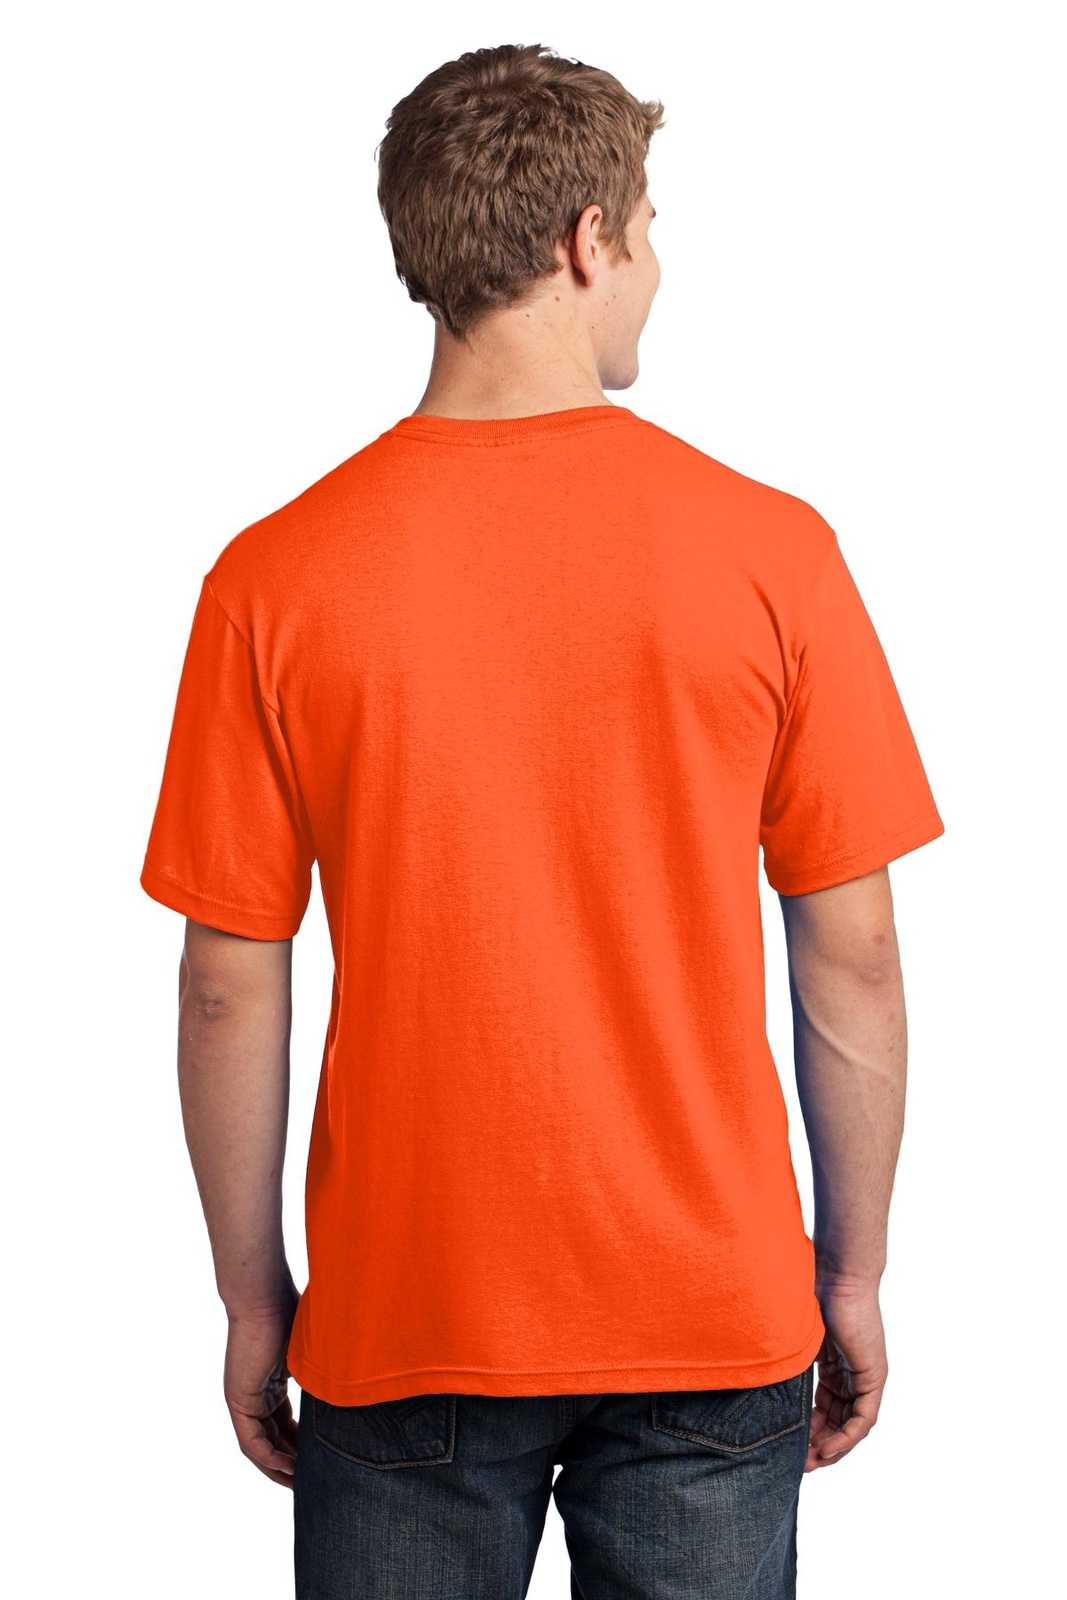 Port & Company USA100 All-American Tee - Safety Orange - HIT a Double - 1